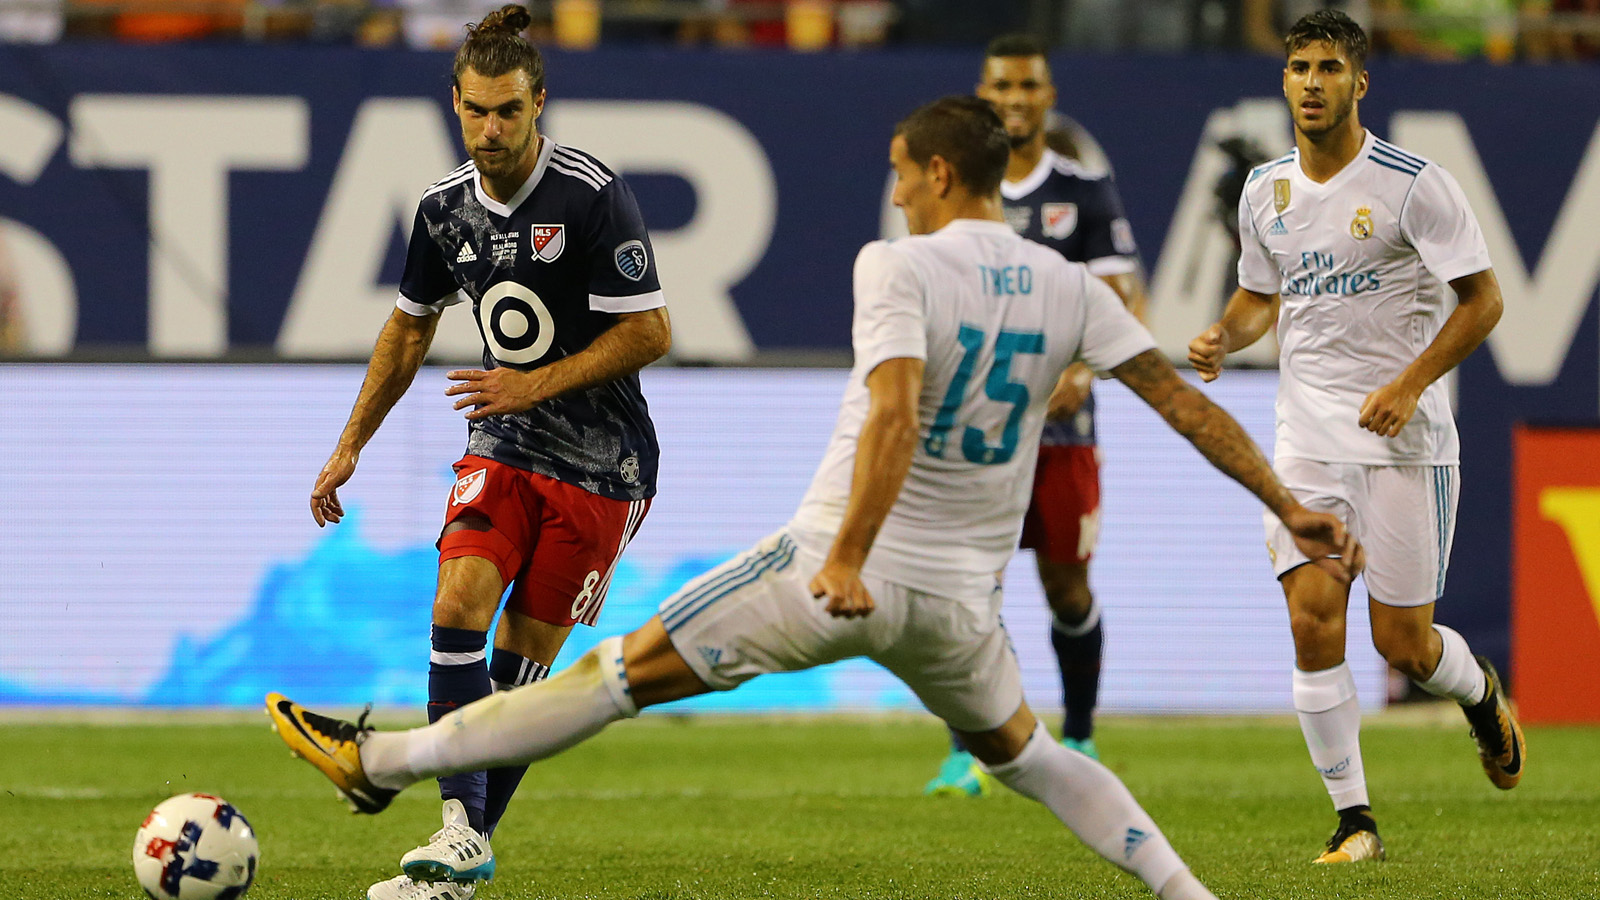 MLS All-Stars fall 4-2 to Real Madrid in penalty kicks